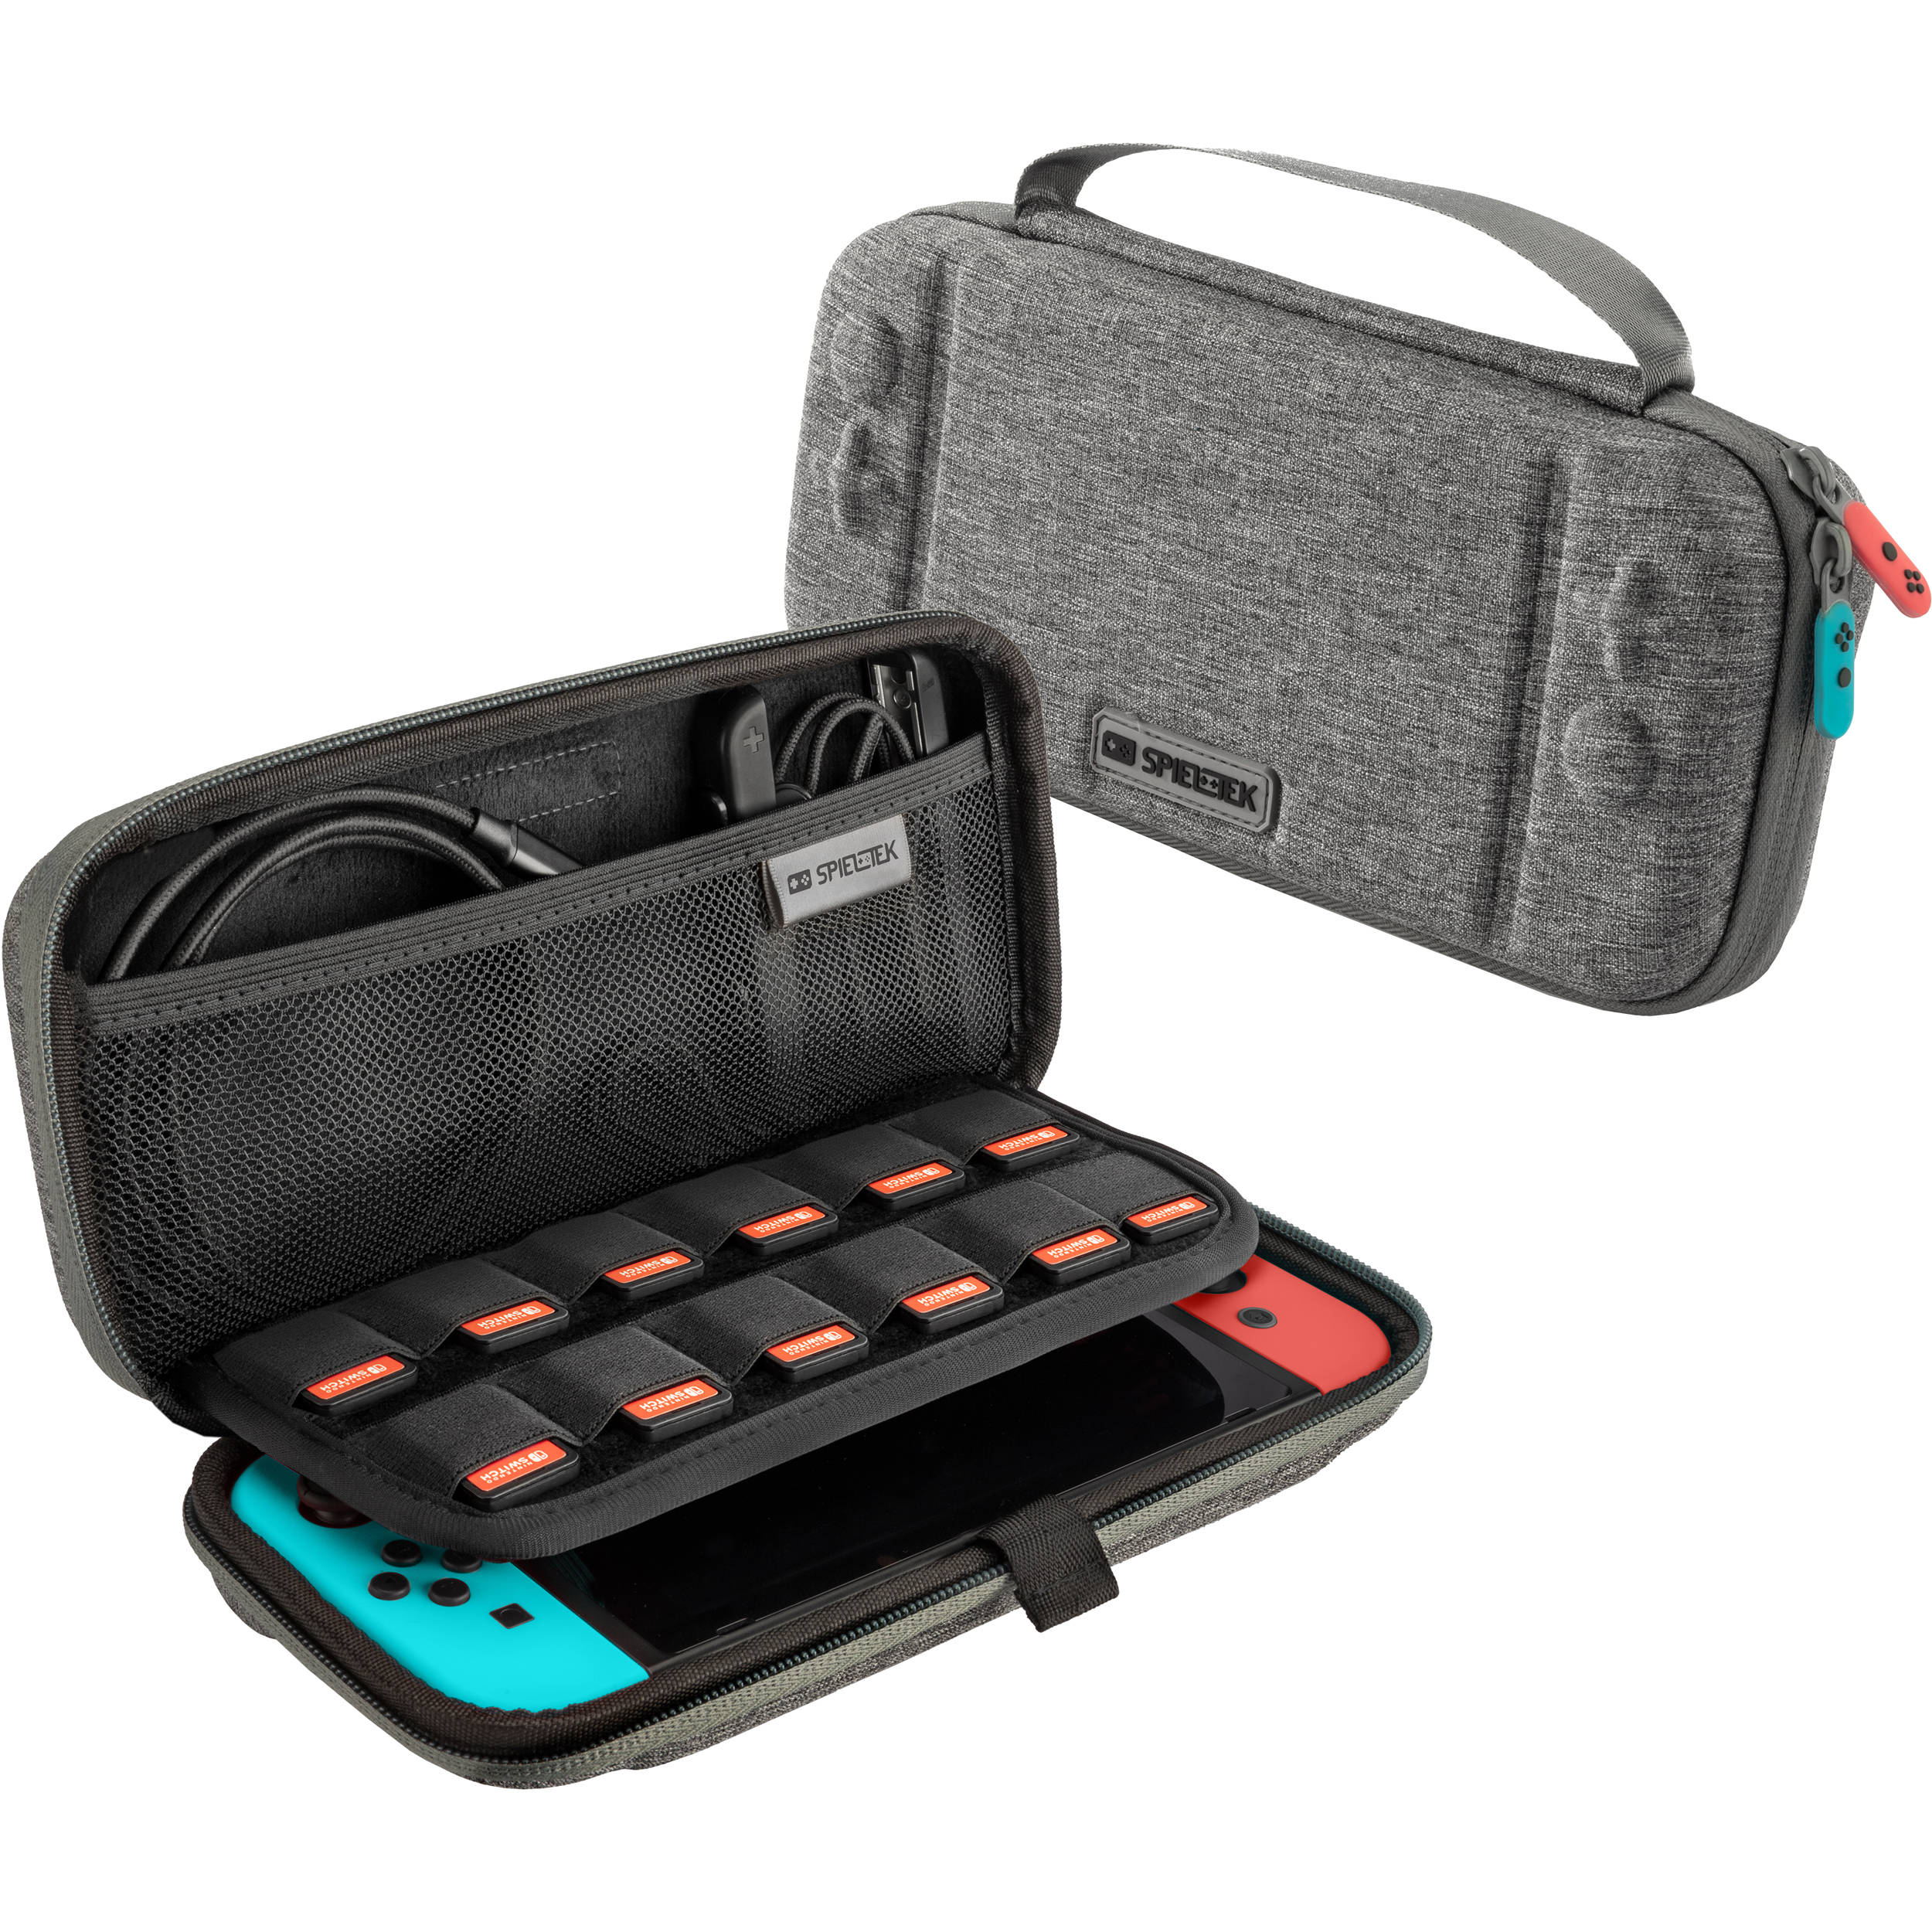 nintendo switch carrying case